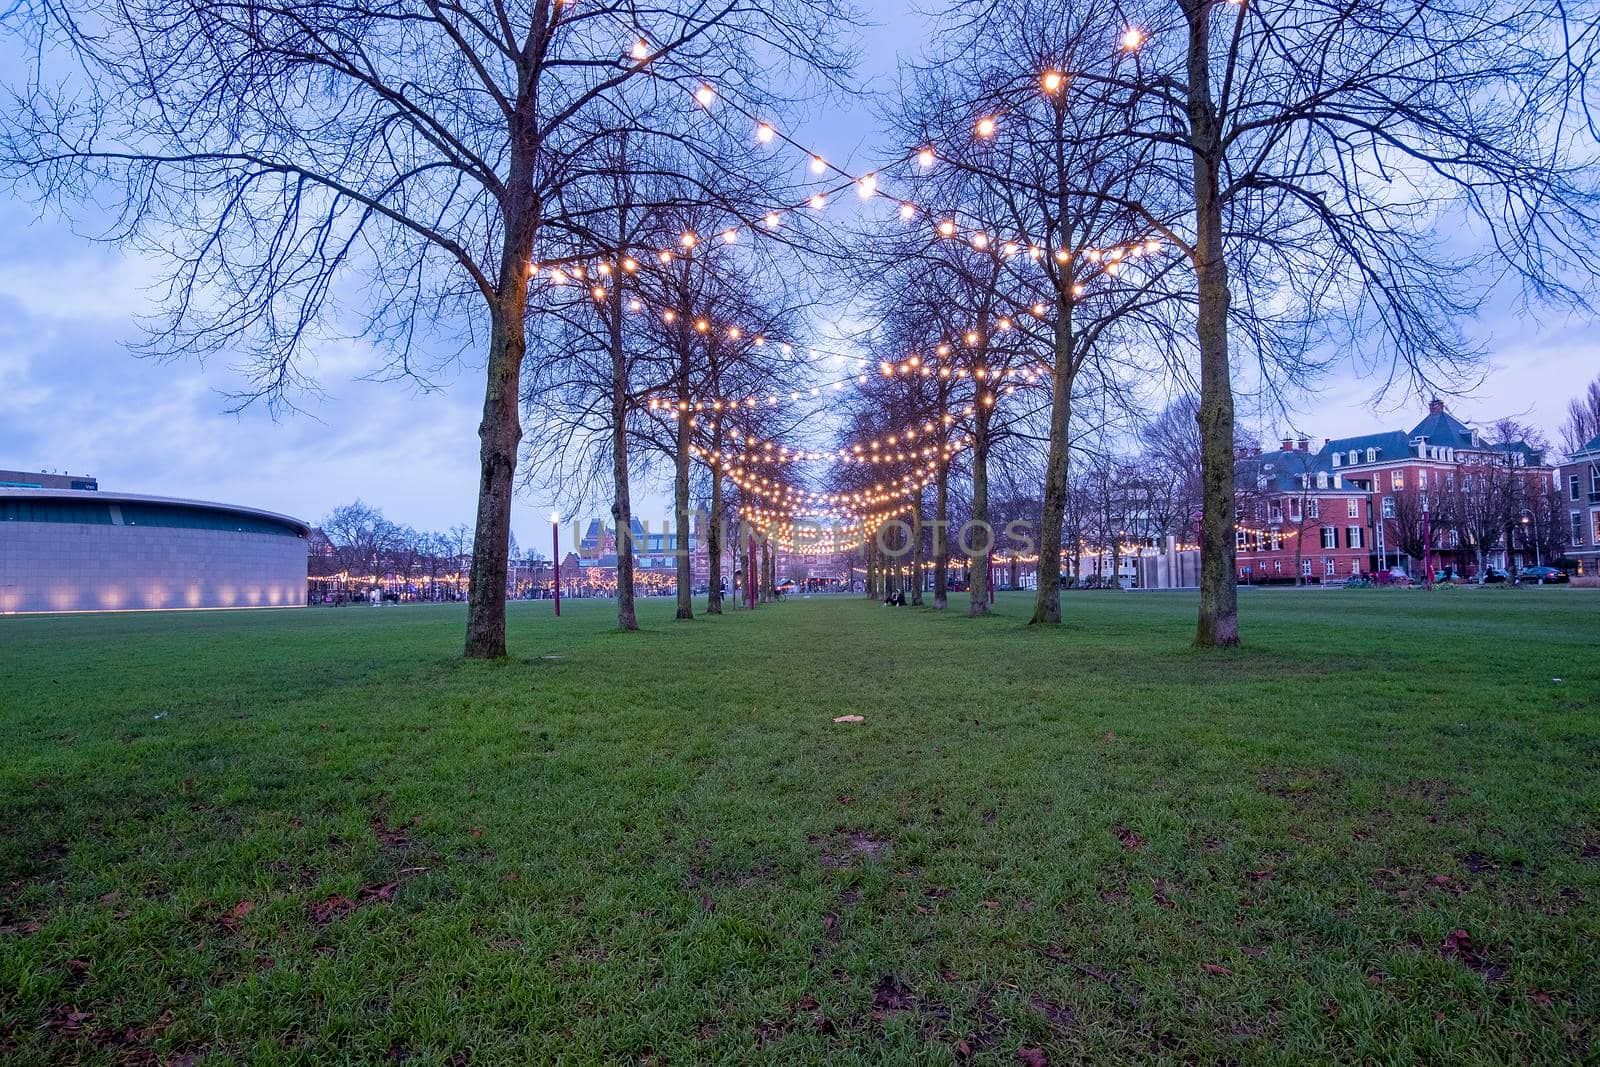 Christmas decoration at the Museumplein in Amsterdam the Neetherlands at twilight by devy